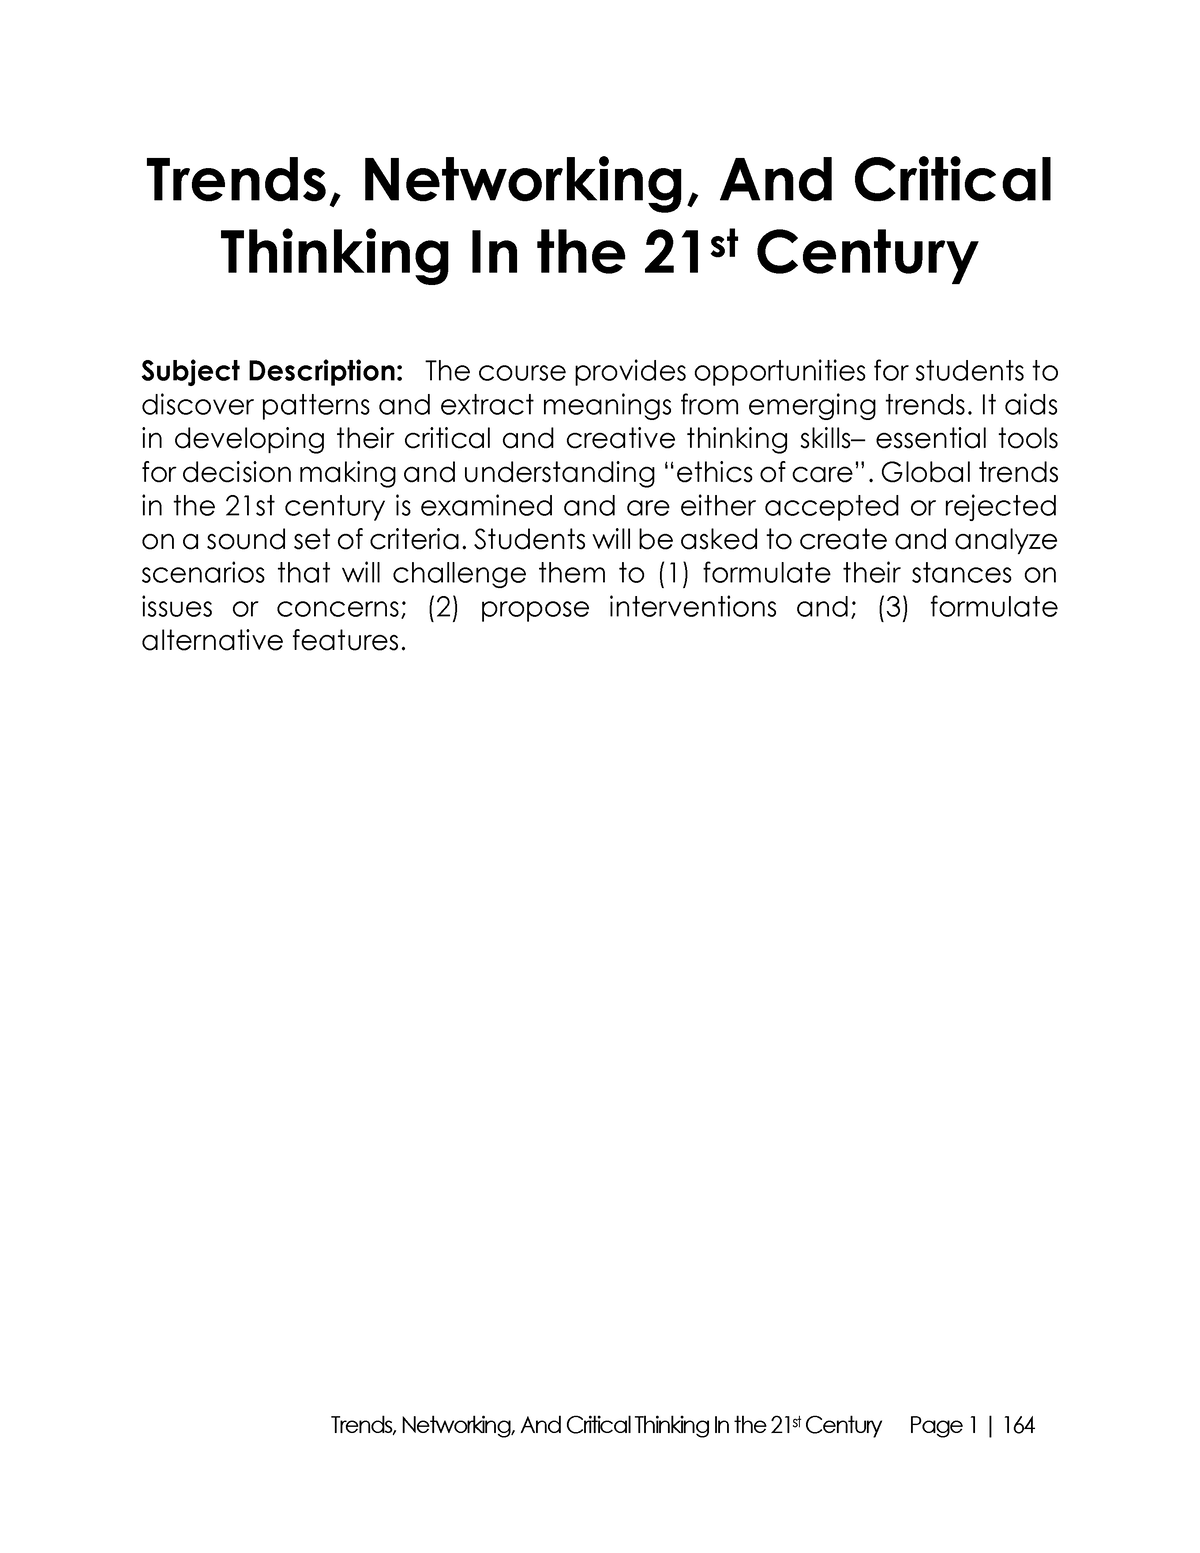 reflection about trends and critical thinking in the 21st century